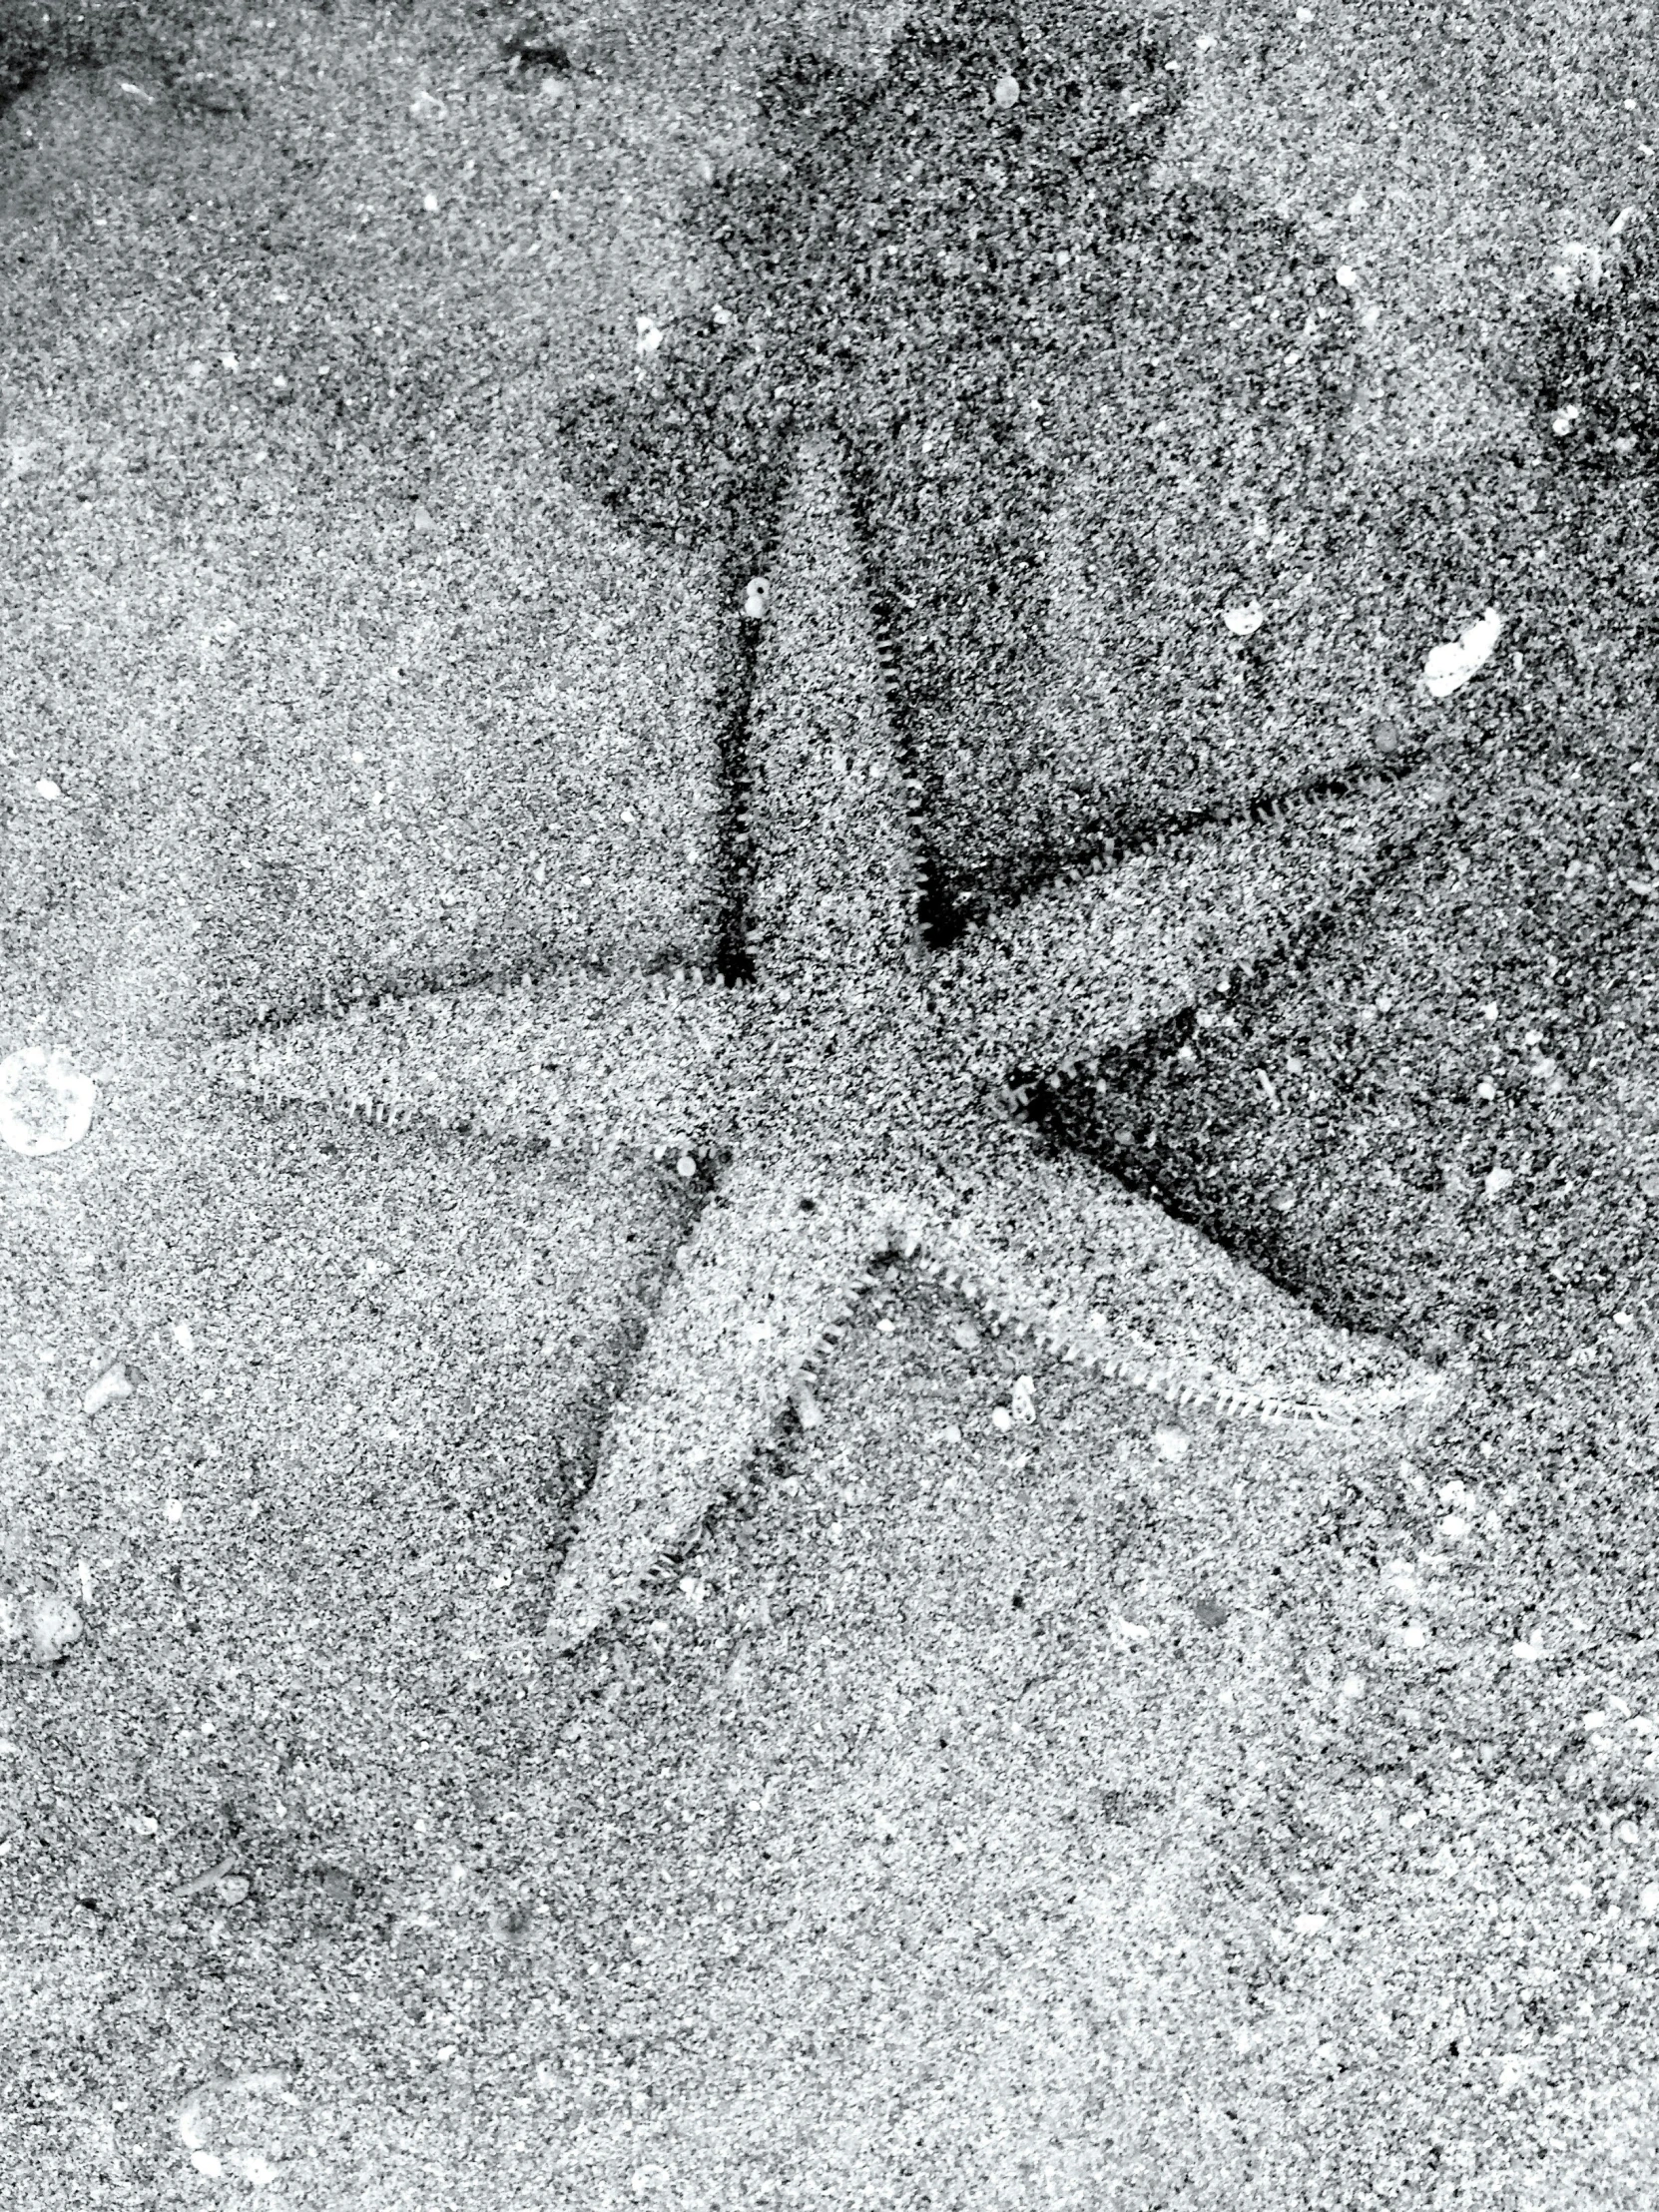 an object on the ground is seen with light